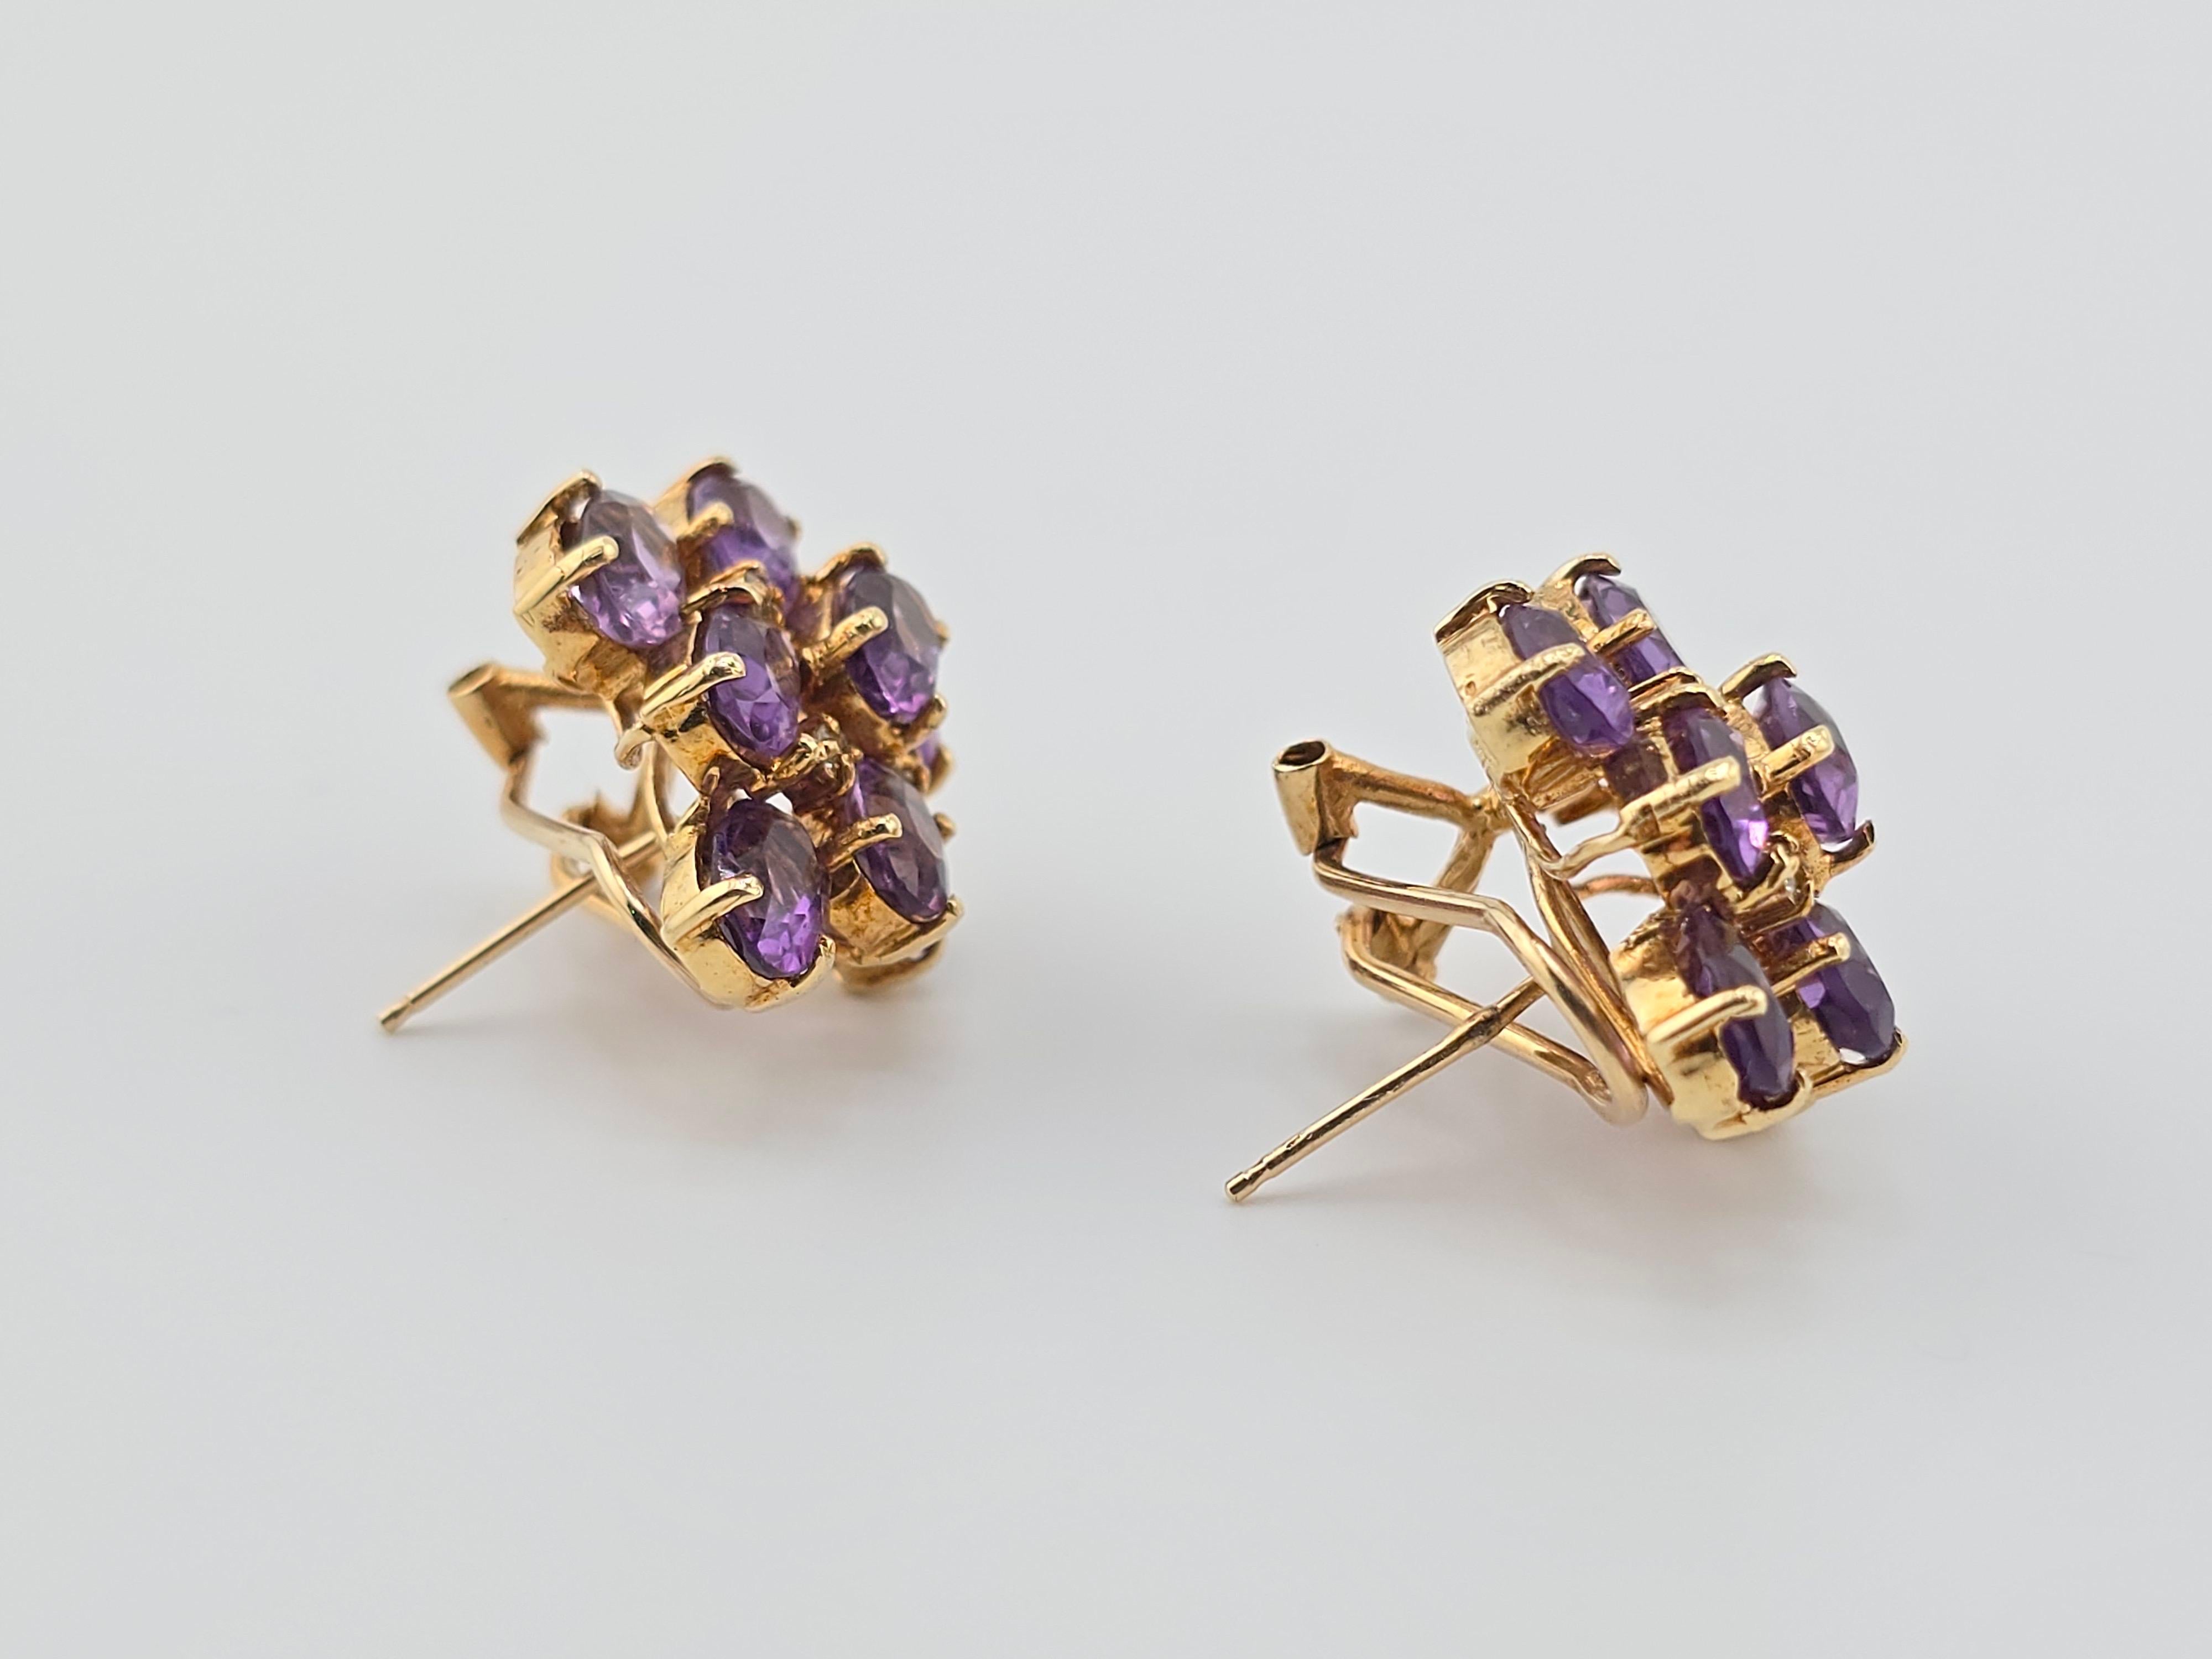 Exceptional 14K Yellow Gold Earrings with Amethyst Omega Clip Backs  For Sale 3